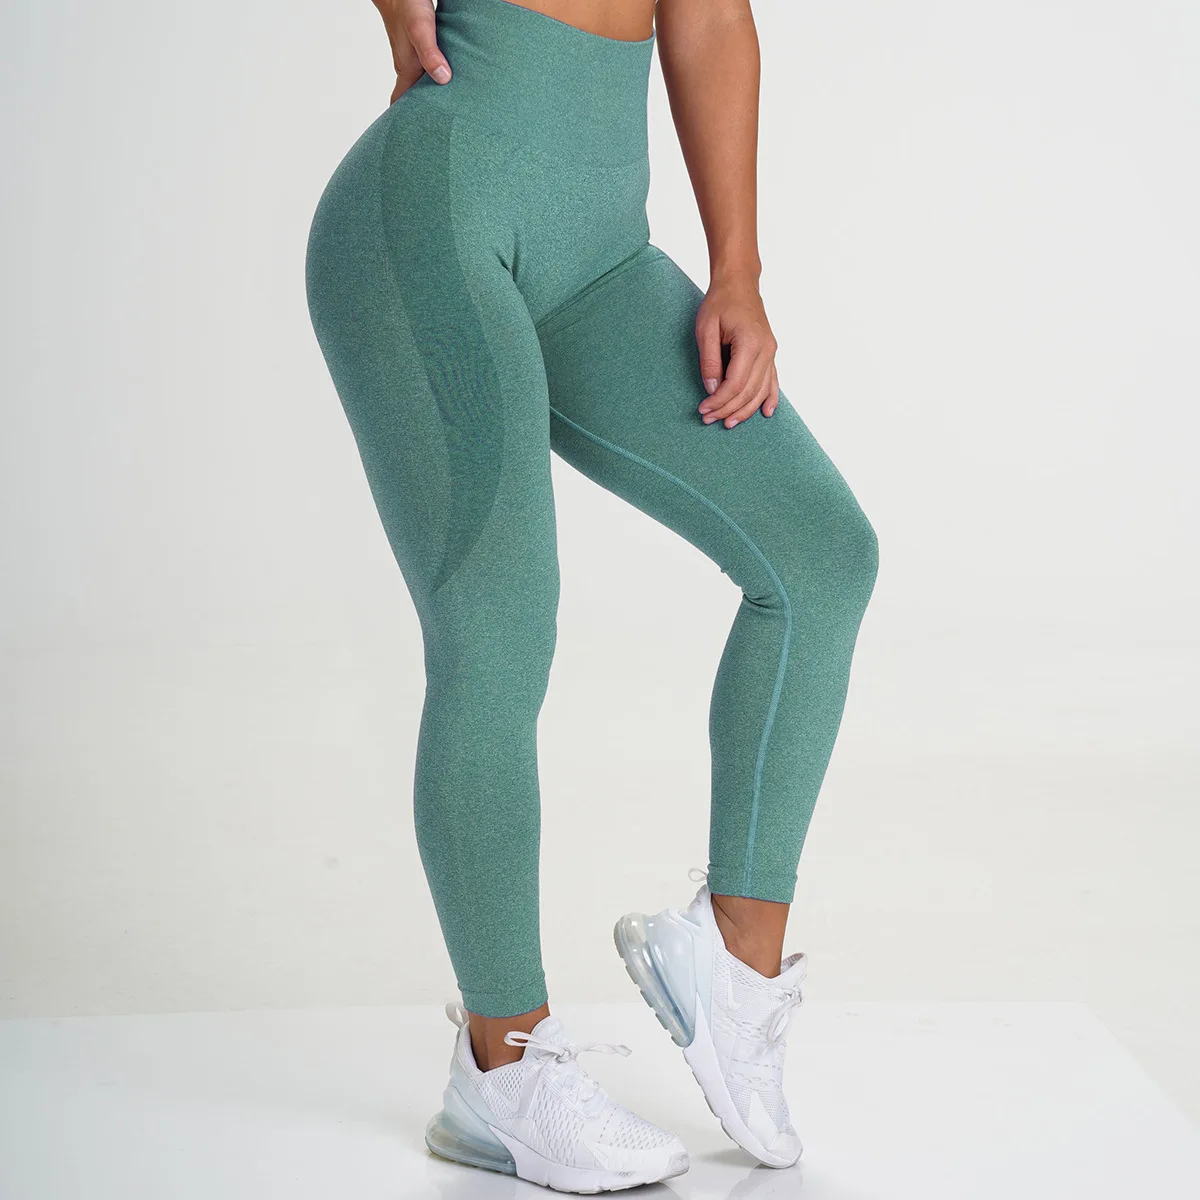 Women Gym Seamless Pants Sports Push Up Leggings Clothes Stretchy High Waist Athletic Exercise Fitness Leggings Activewear Pants leggings with pockets